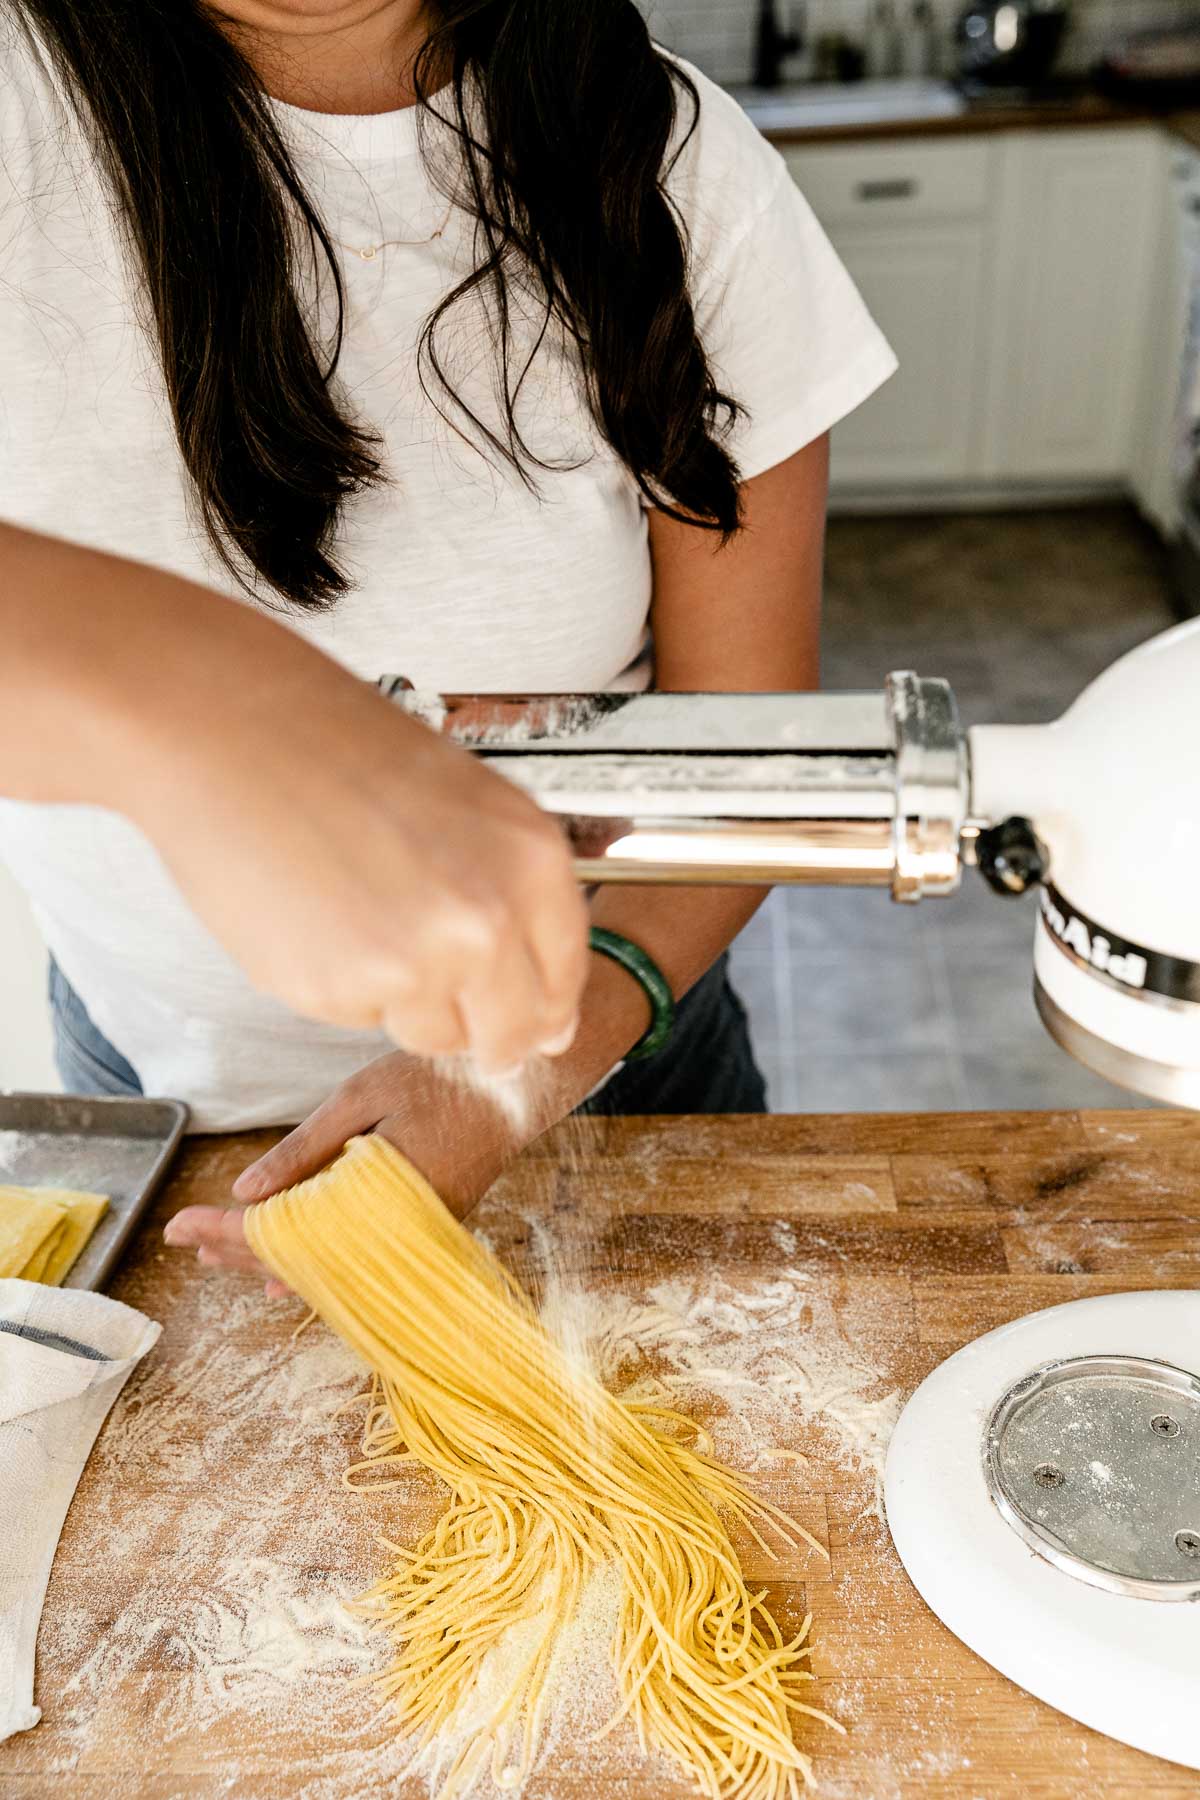 A woman loosely holds strands of fresh pasta cut into spaghetti in one hand as the bottom of the strands rest on a butcher block countertop lightly dusted with flour. ​A KitchenAid Stand Mixer with a pasta rolling attachment is set up to be used to roll out the pasta dough and an aluminum baking sheet also sits on top of the countertop.